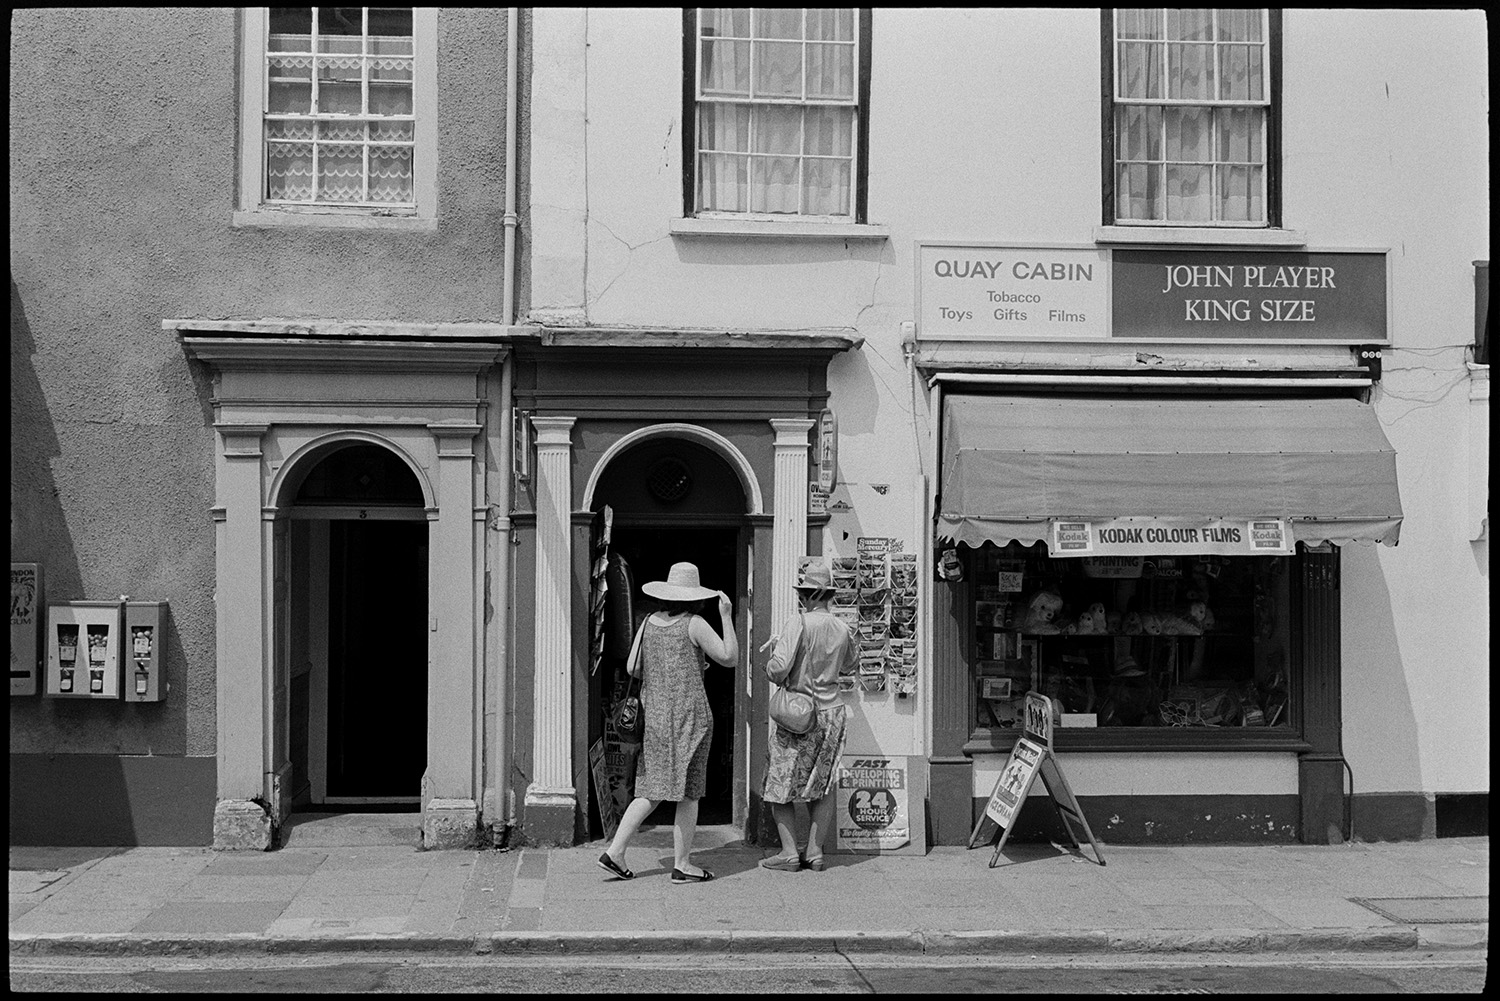 Doorways and shopfronts. 
[Two women, wearing straw hats, looking at postcards outside the Quay Cabin shop front in Bideford.]